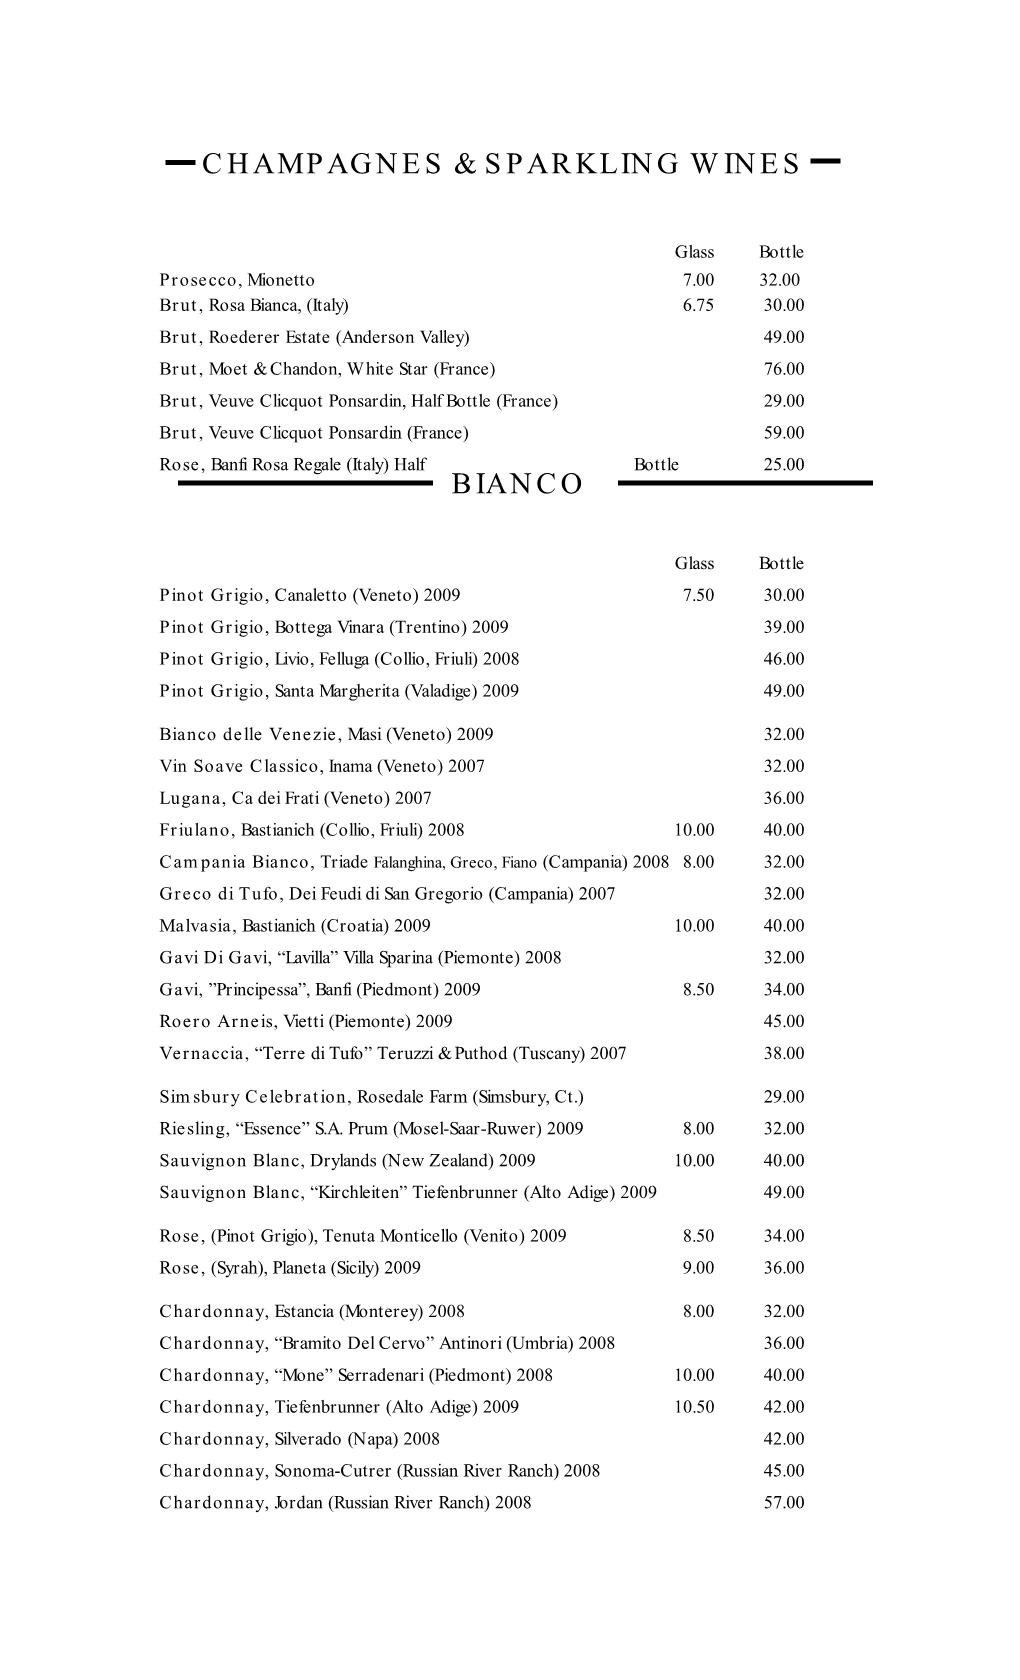 Champagnes & Sparkling Wines Bianco